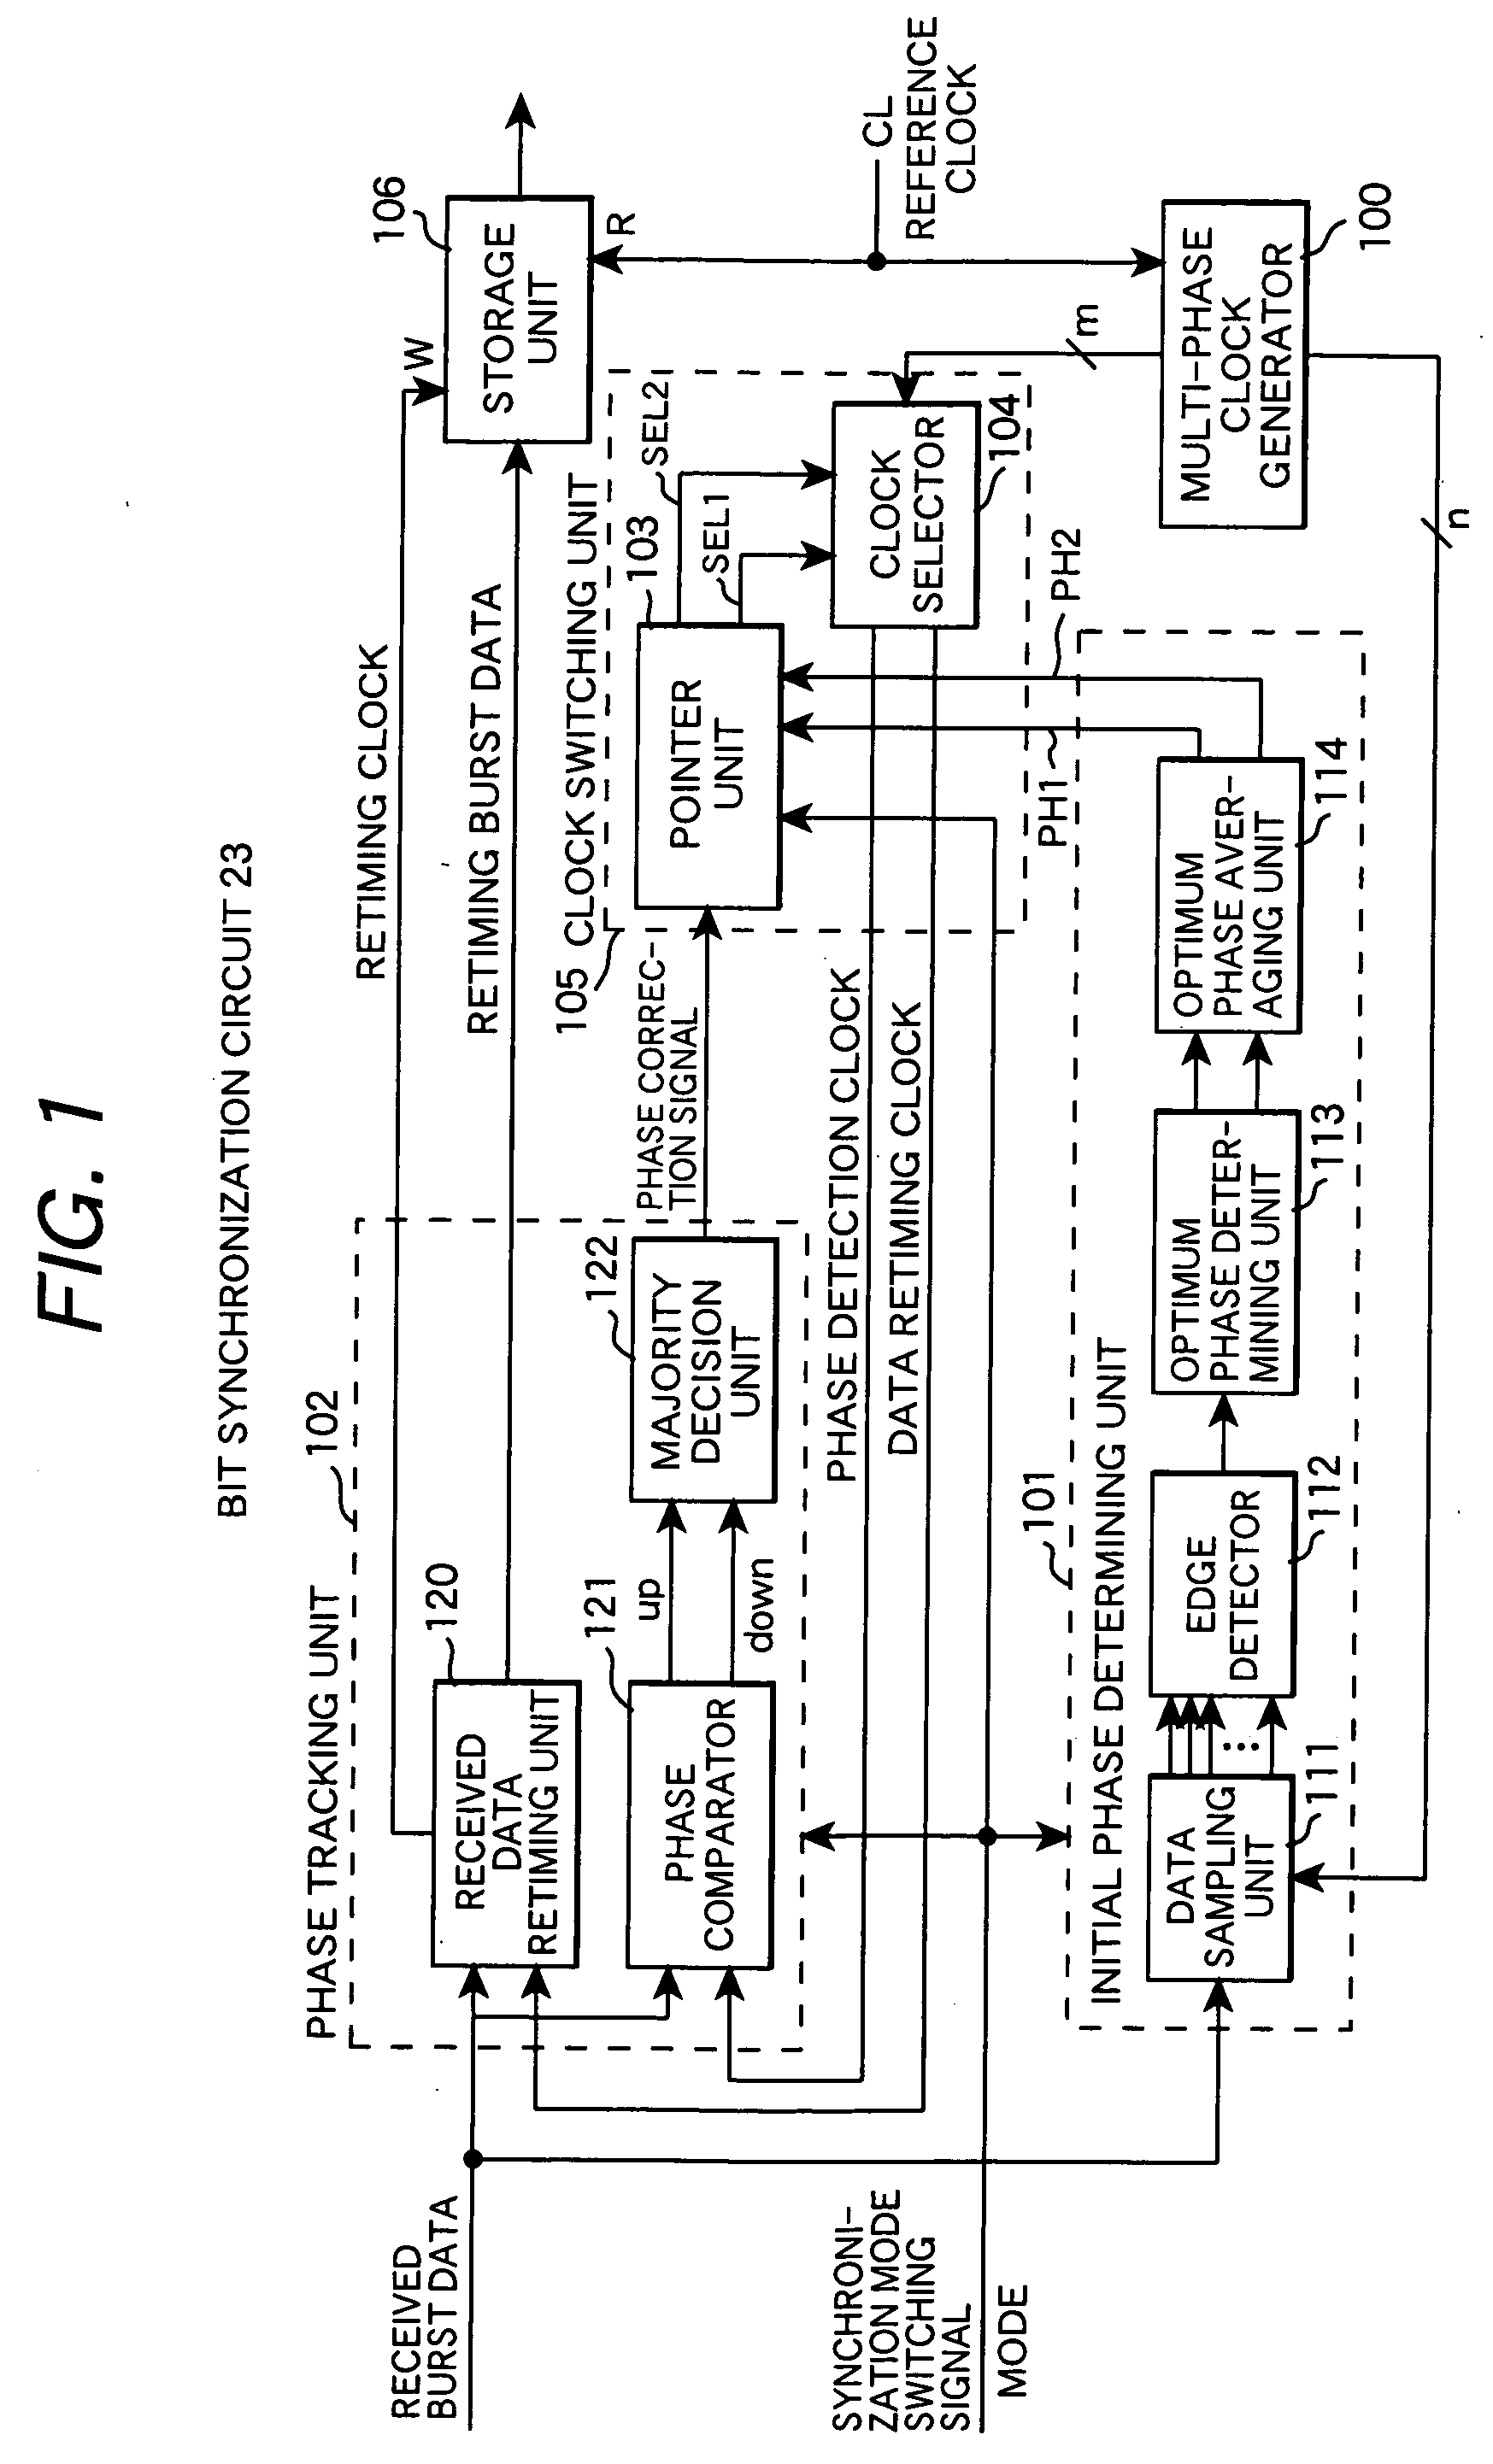 Bit synchronization circuit with phase tracking function